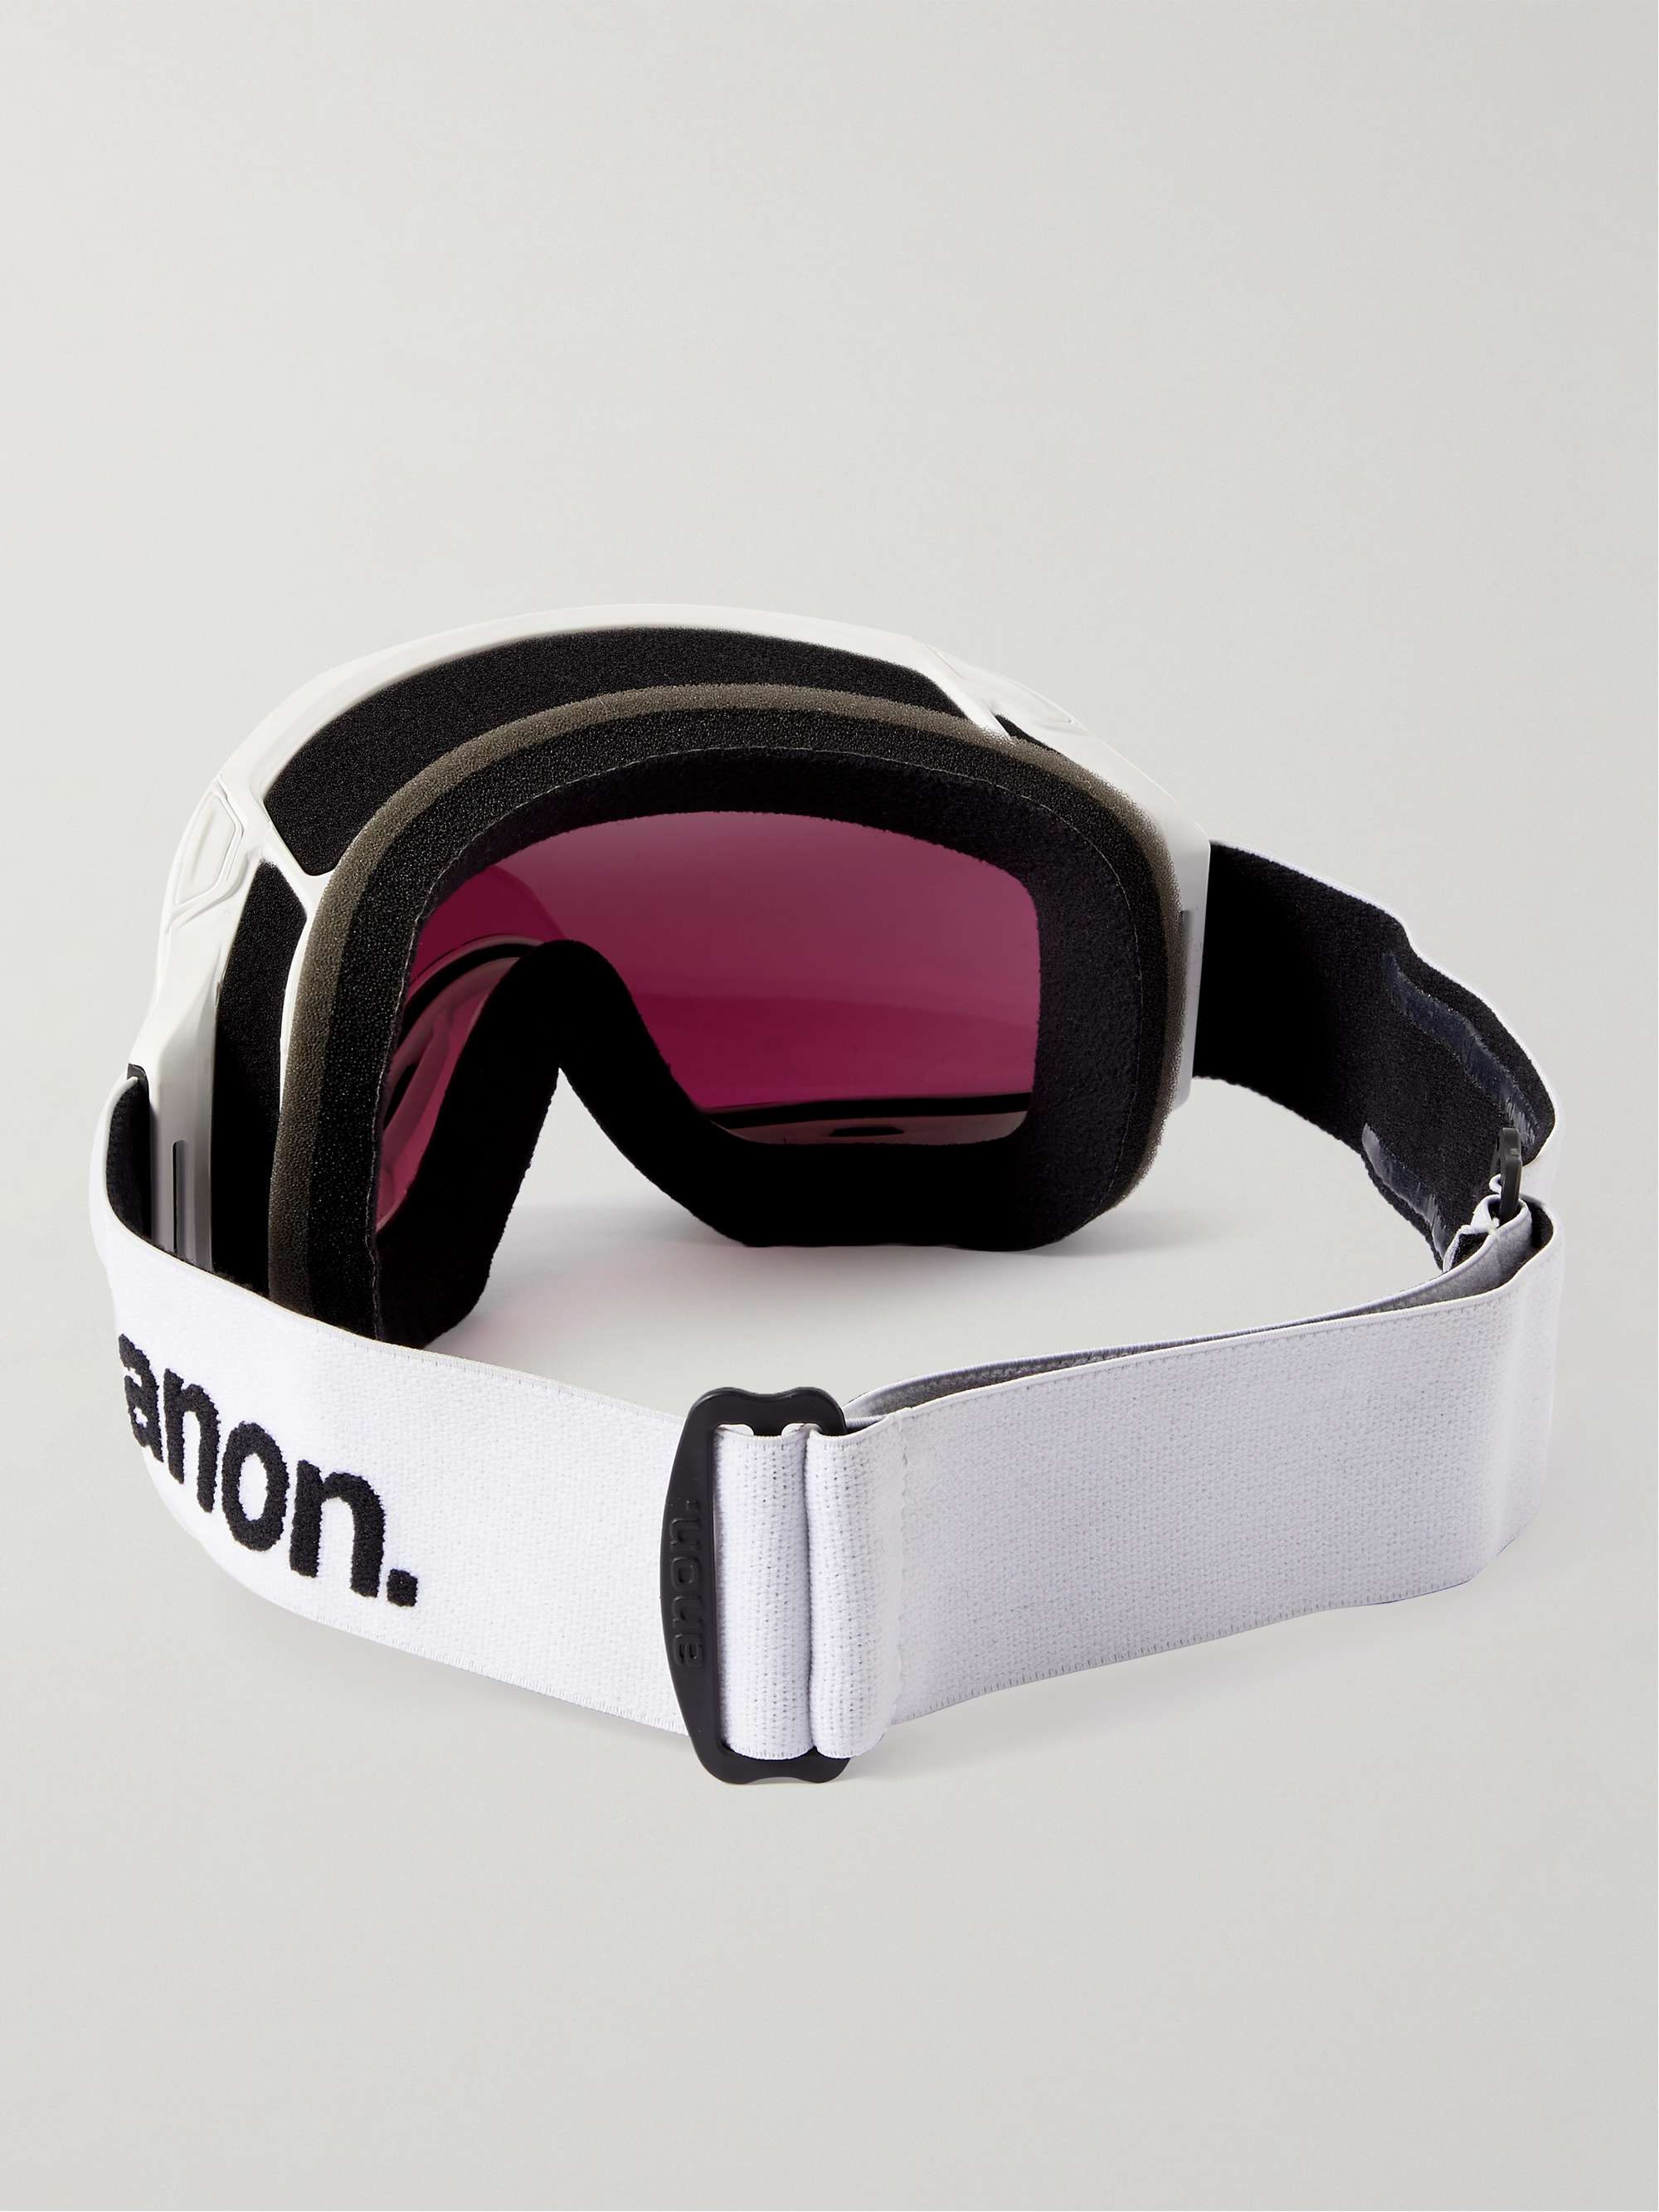 ANON M4 Cylindrical Ski Goggles and Stretch-Jersey Face Mask